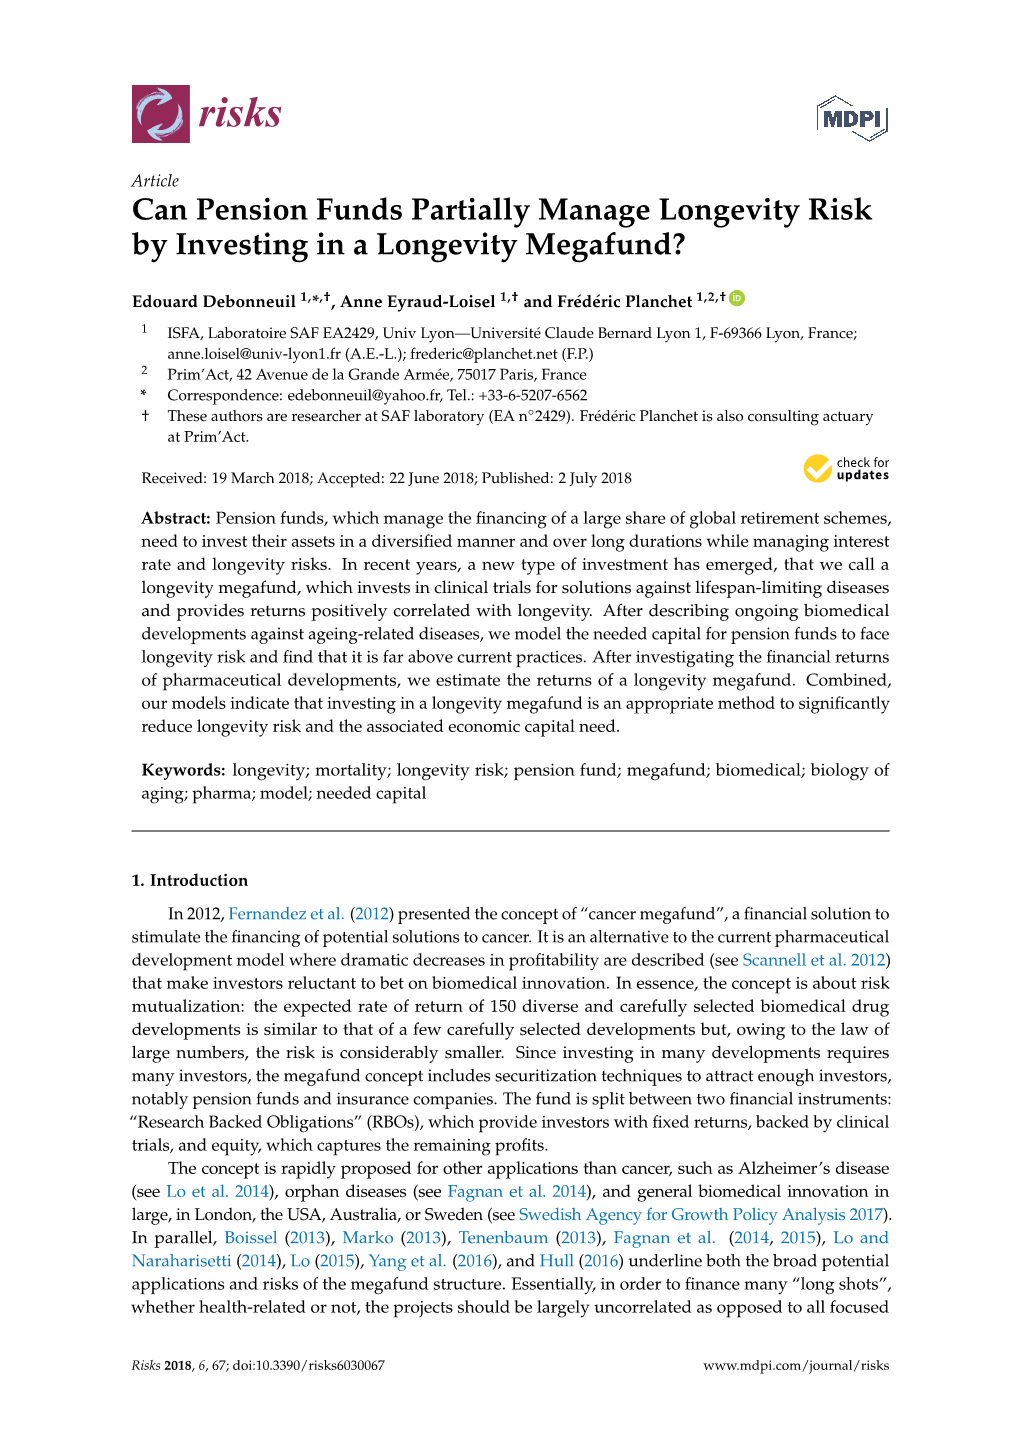 Can Pension Funds Partially Manage Longevity Risk by Investing in a Longevity Megafund?